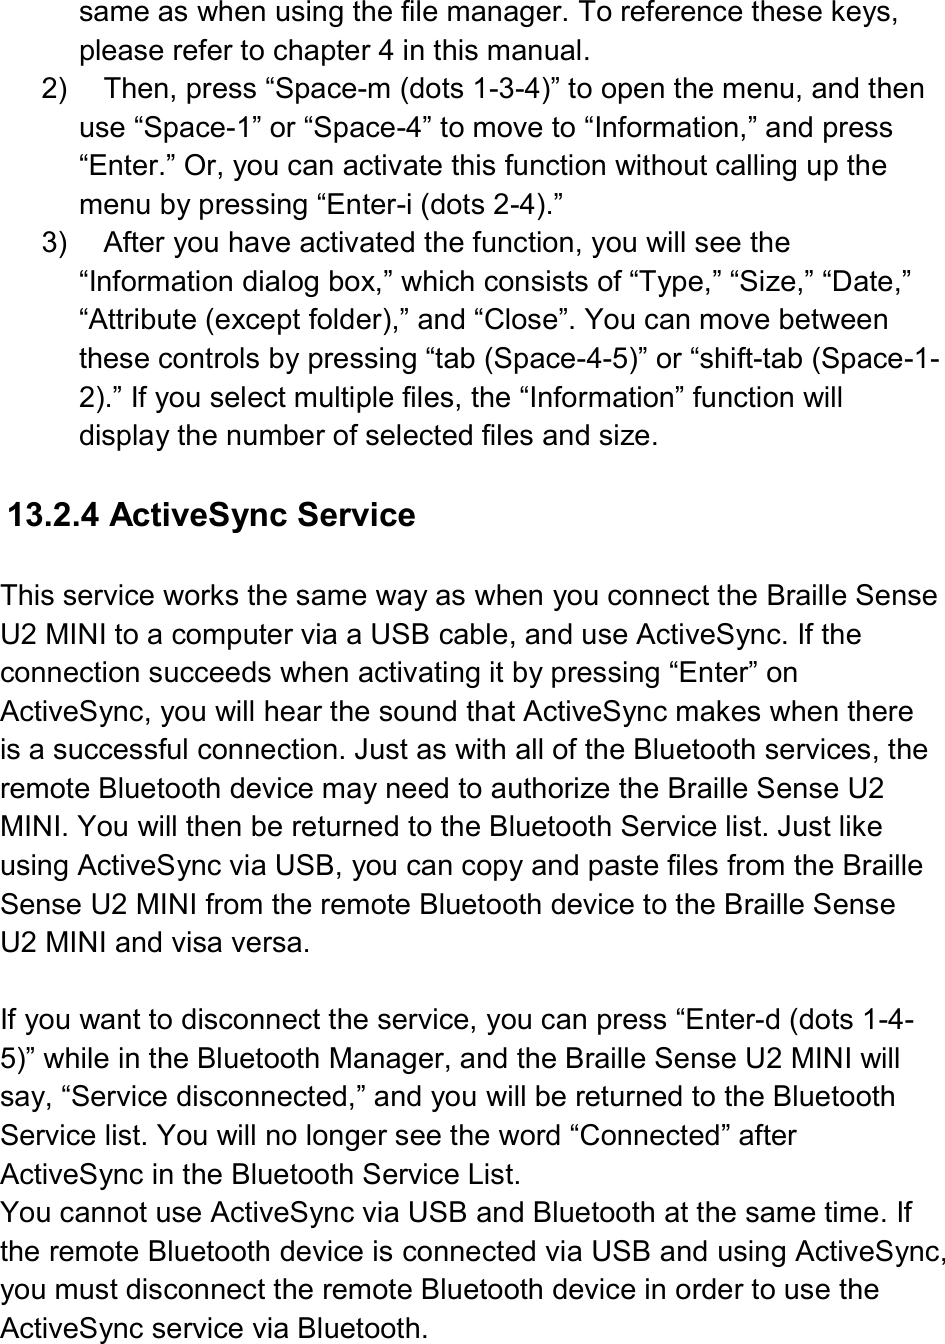  same as when using the file manager. To reference these keys, please refer to chapter 4 in this manual. 2)  Then, press “Space-m (dots 1-3-4)” to open the menu, and then use “Space-1” or “Space-4” to move to “Information,” and press “Enter.” Or, you can activate this function without calling up the menu by pressing “Enter-i (dots 2-4).” 3)  After you have activated the function, you will see the “Information dialog box,” which consists of “Type,” “Size,” “Date,” “Attribute (except folder),” and “Close”. You can move between these controls by pressing “tab (Space-4-5)” or “shift-tab (Space-1-2).” If you select multiple files, the “Information” function will display the number of selected files and size.  13.2.4 ActiveSync Service  This service works the same way as when you connect the Braille Sense U2 MINI to a computer via a USB cable, and use ActiveSync. If the connection succeeds when activating it by pressing “Enter” on ActiveSync, you will hear the sound that ActiveSync makes when there is a successful connection. Just as with all of the Bluetooth services, the remote Bluetooth device may need to authorize the Braille Sense U2 MINI. You will then be returned to the Bluetooth Service list. Just like using ActiveSync via USB, you can copy and paste files from the Braille Sense U2 MINI from the remote Bluetooth device to the Braille Sense U2 MINI and visa versa.  If you want to disconnect the service, you can press “Enter-d (dots 1-4-5)” while in the Bluetooth Manager, and the Braille Sense U2 MINI will say, “Service disconnected,” and you will be returned to the Bluetooth Service list. You will no longer see the word “Connected” after ActiveSync in the Bluetooth Service List. You cannot use ActiveSync via USB and Bluetooth at the same time. If the remote Bluetooth device is connected via USB and using ActiveSync, you must disconnect the remote Bluetooth device in order to use the ActiveSync service via Bluetooth.  